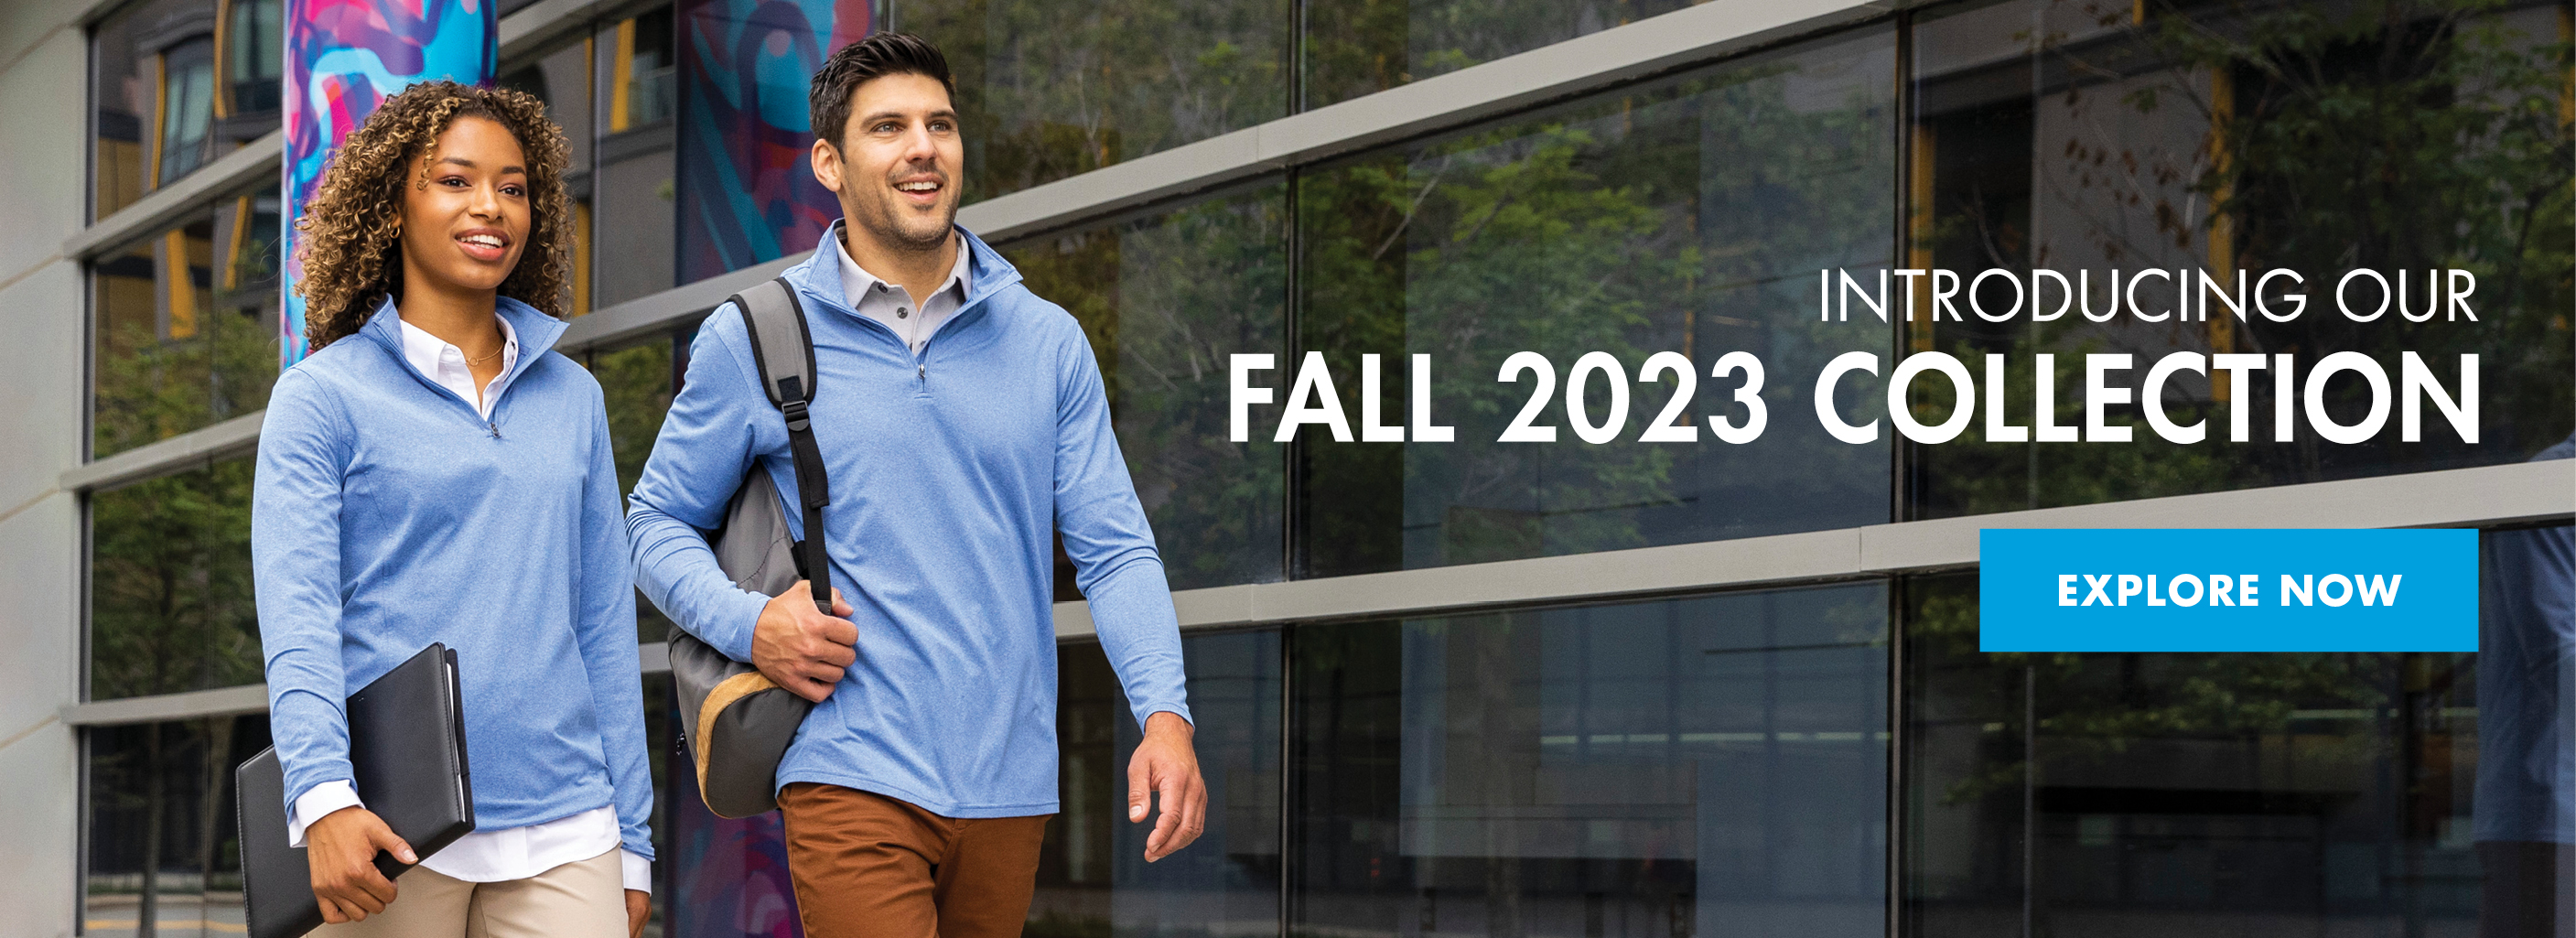 Introducing Our Fall 2023 Collection - Explore Now